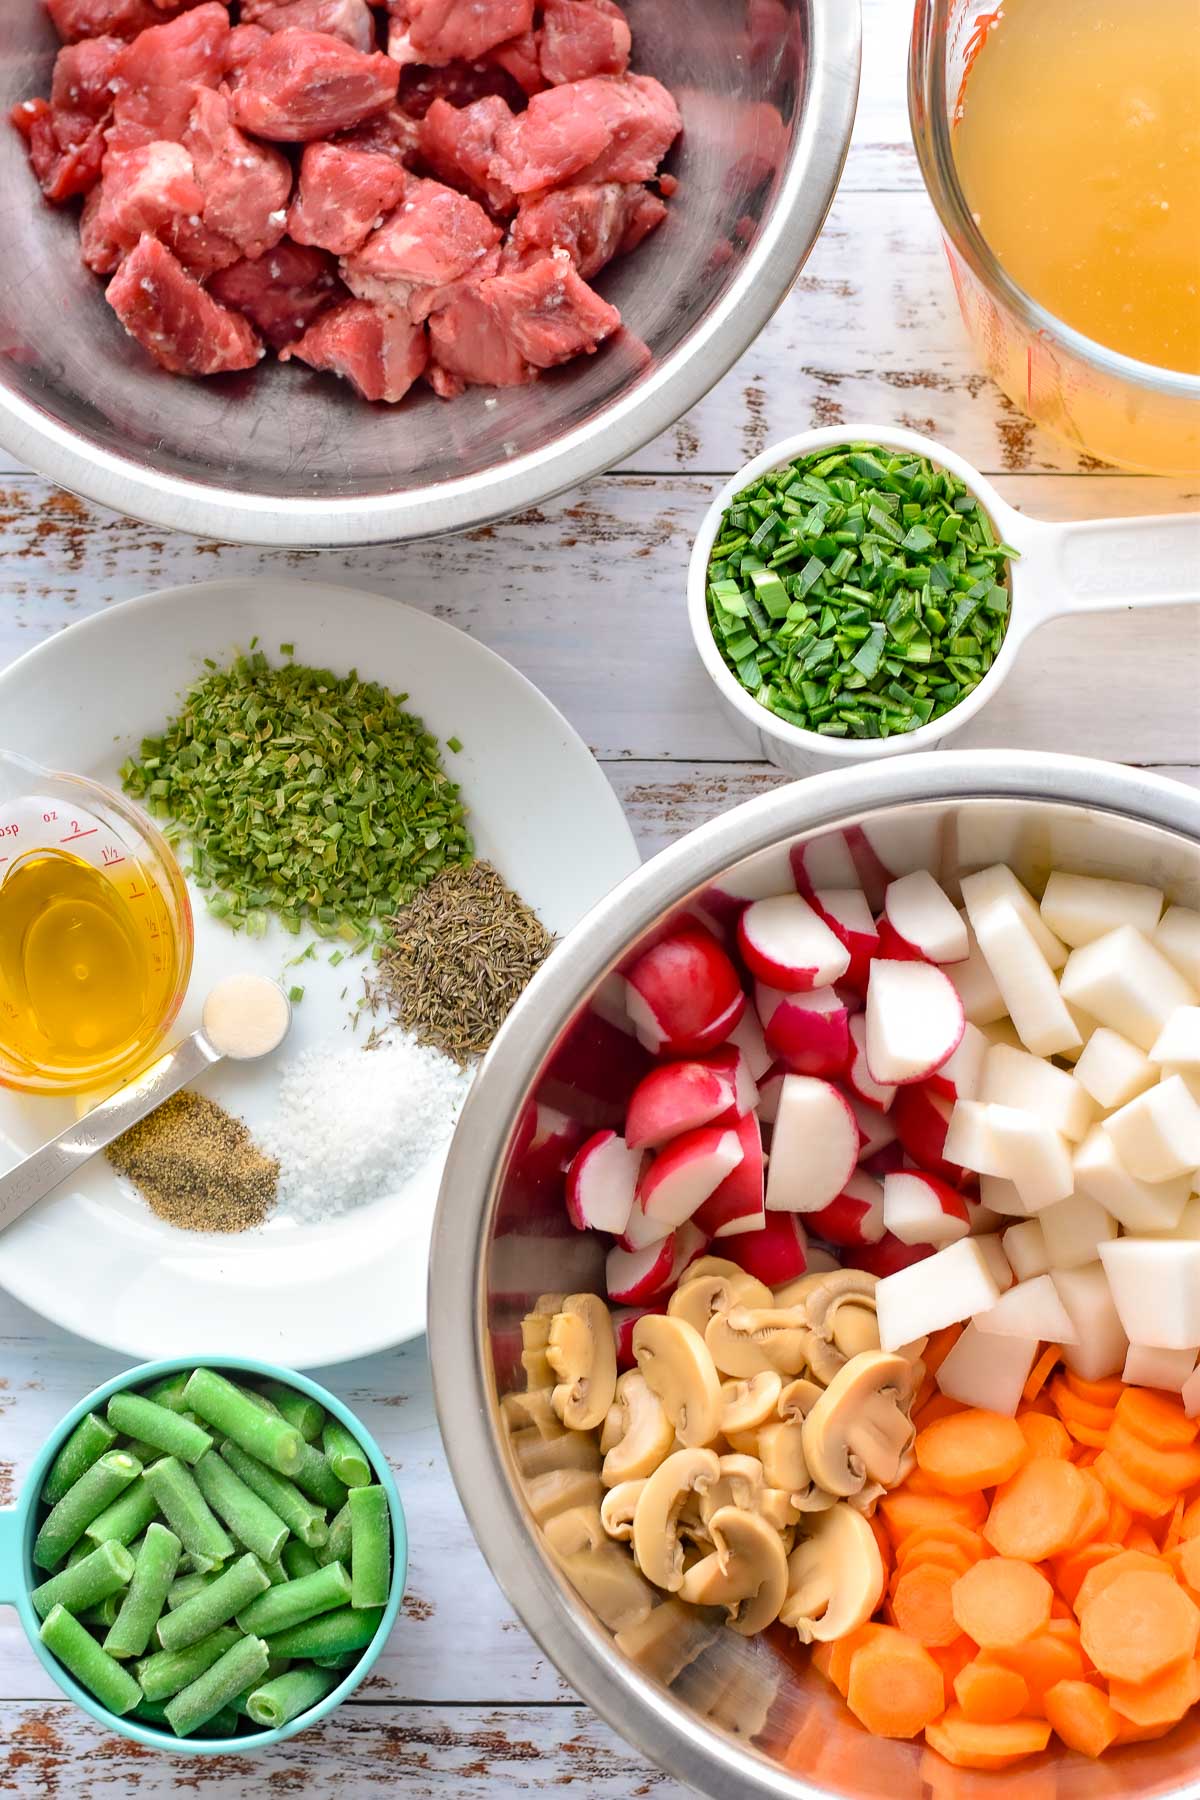 keto beef stew ingredients including chopped beef stew meat, beef broth, finely chopped leek greens, chopped radish and turnip, sliced carrot and canned mushrooms, frozen cut green beans, dried chives and thyme, kosher salt, ground black pepper, garlic-infused olive oil, and xanthan gum (optional).